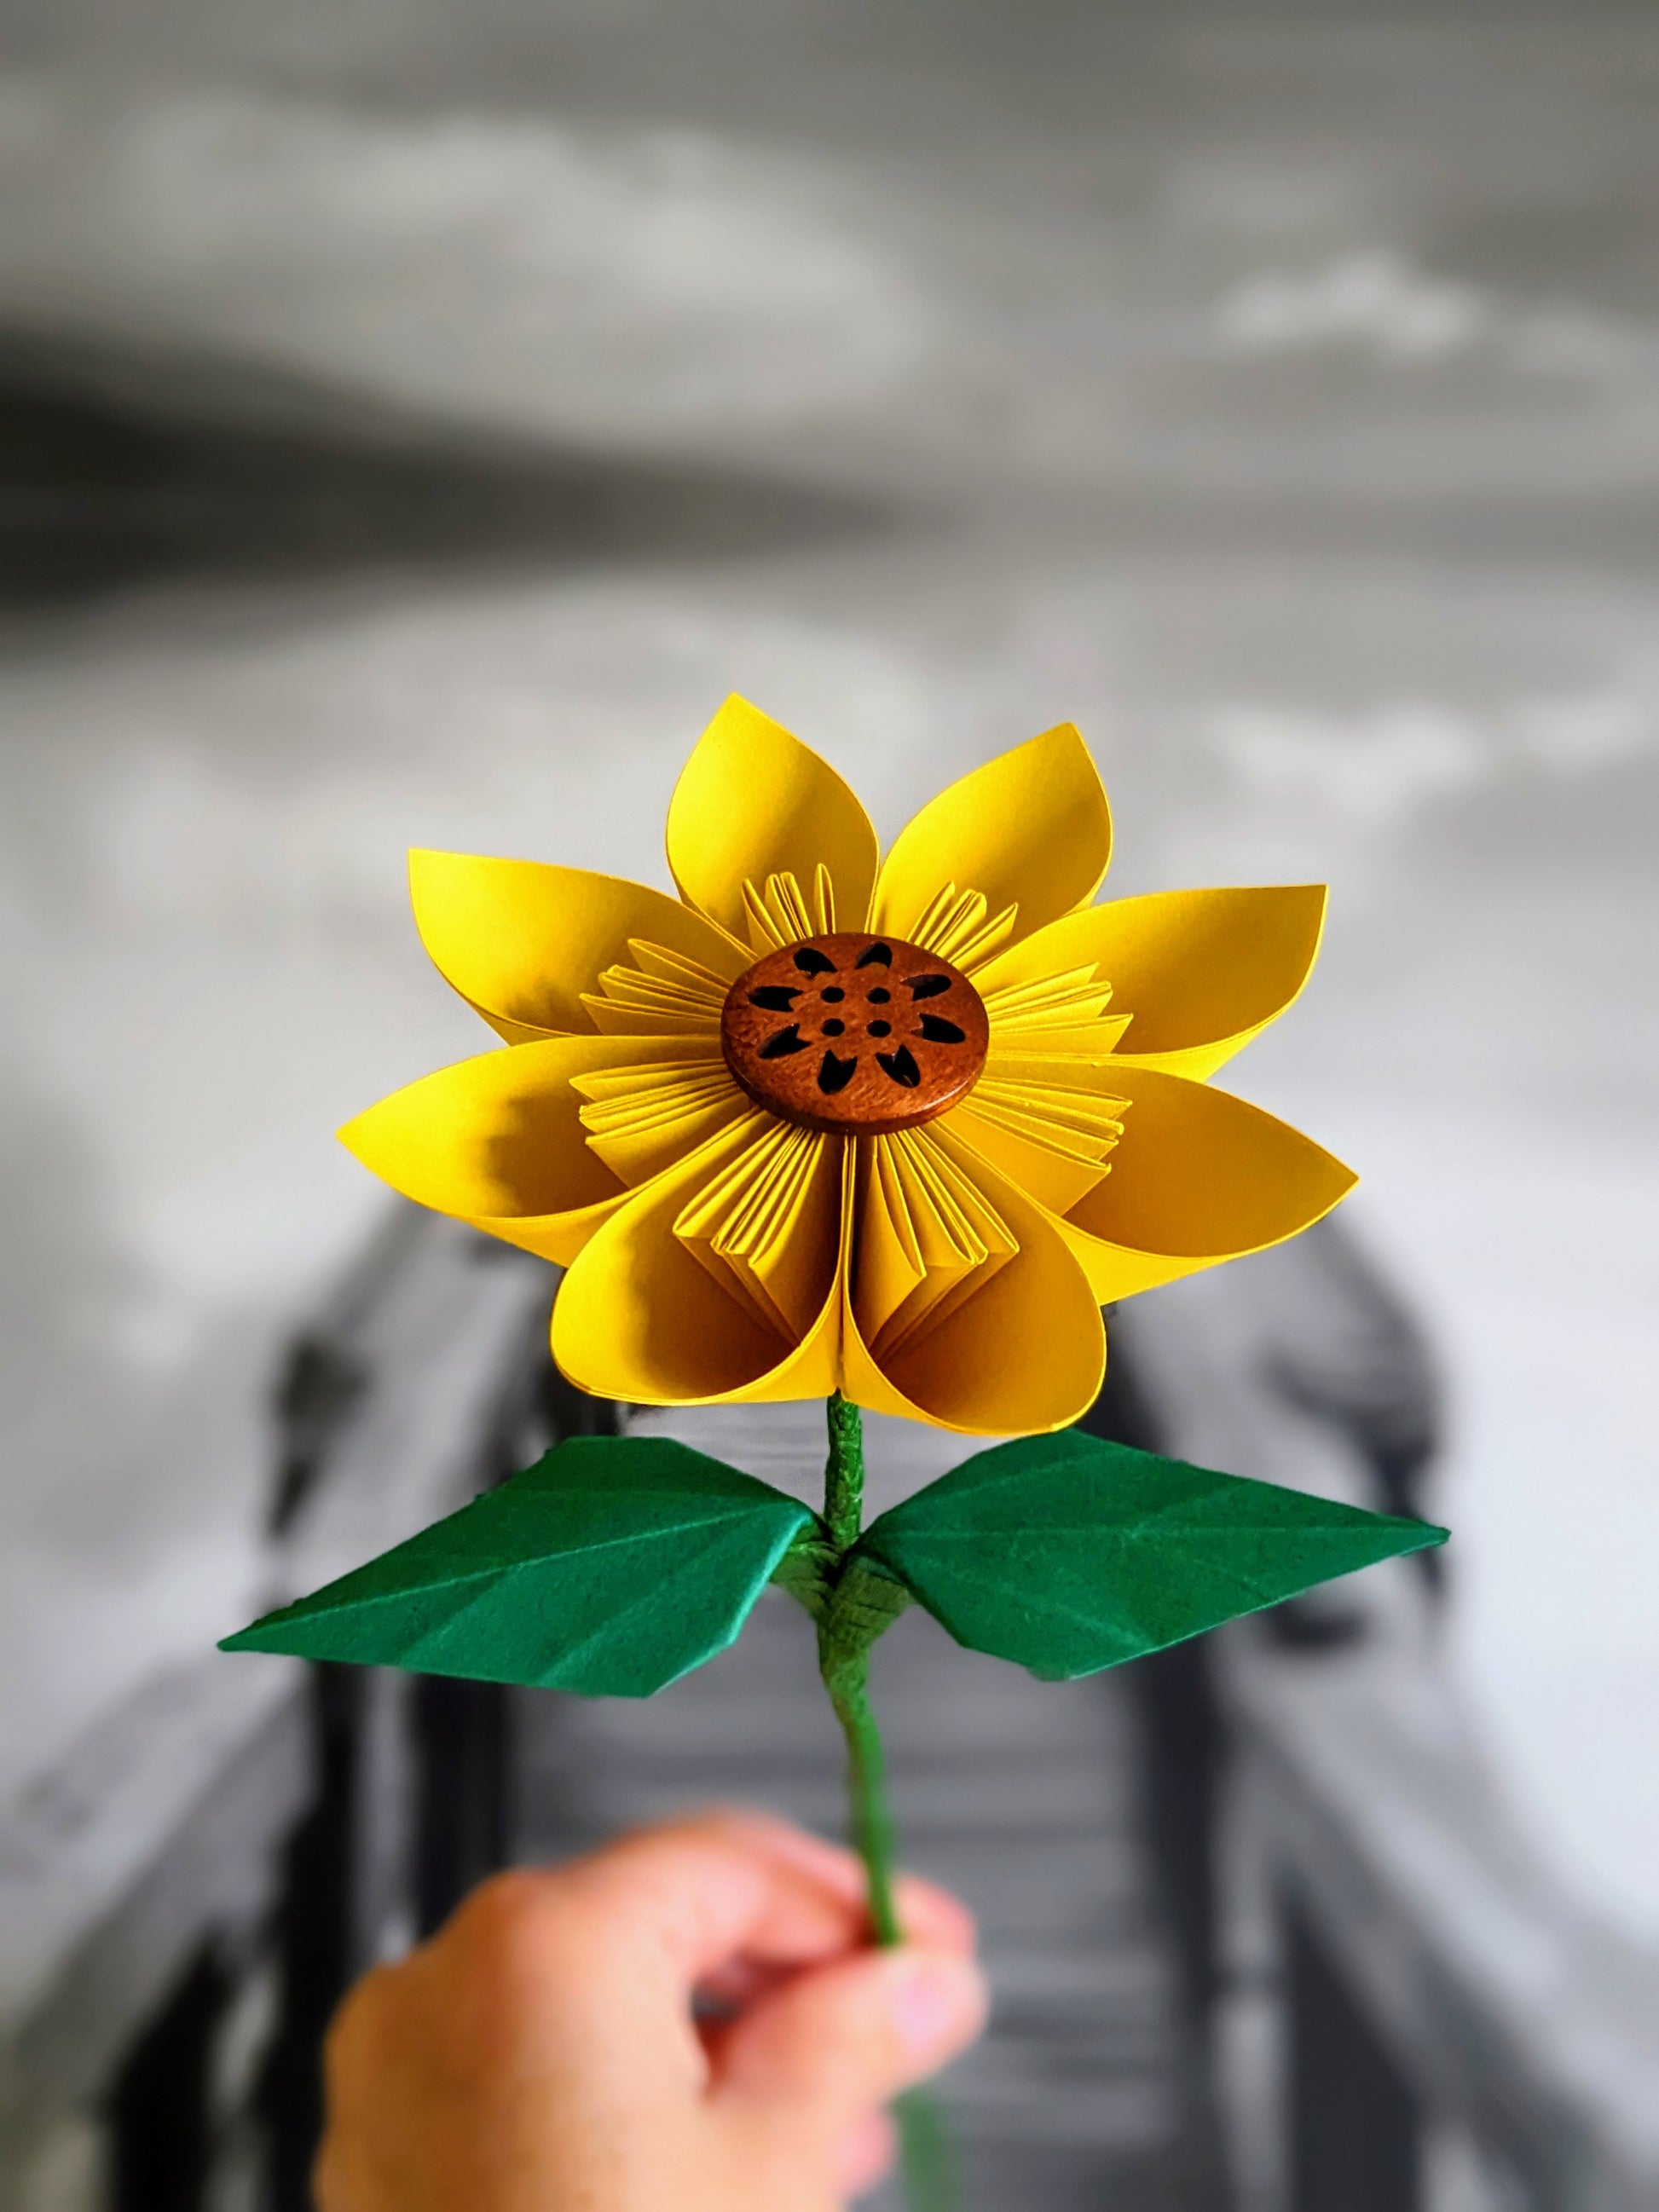 Yellow origami sunflower with 8 paper petals and a brown button centre on a long wire stem with two green leaves